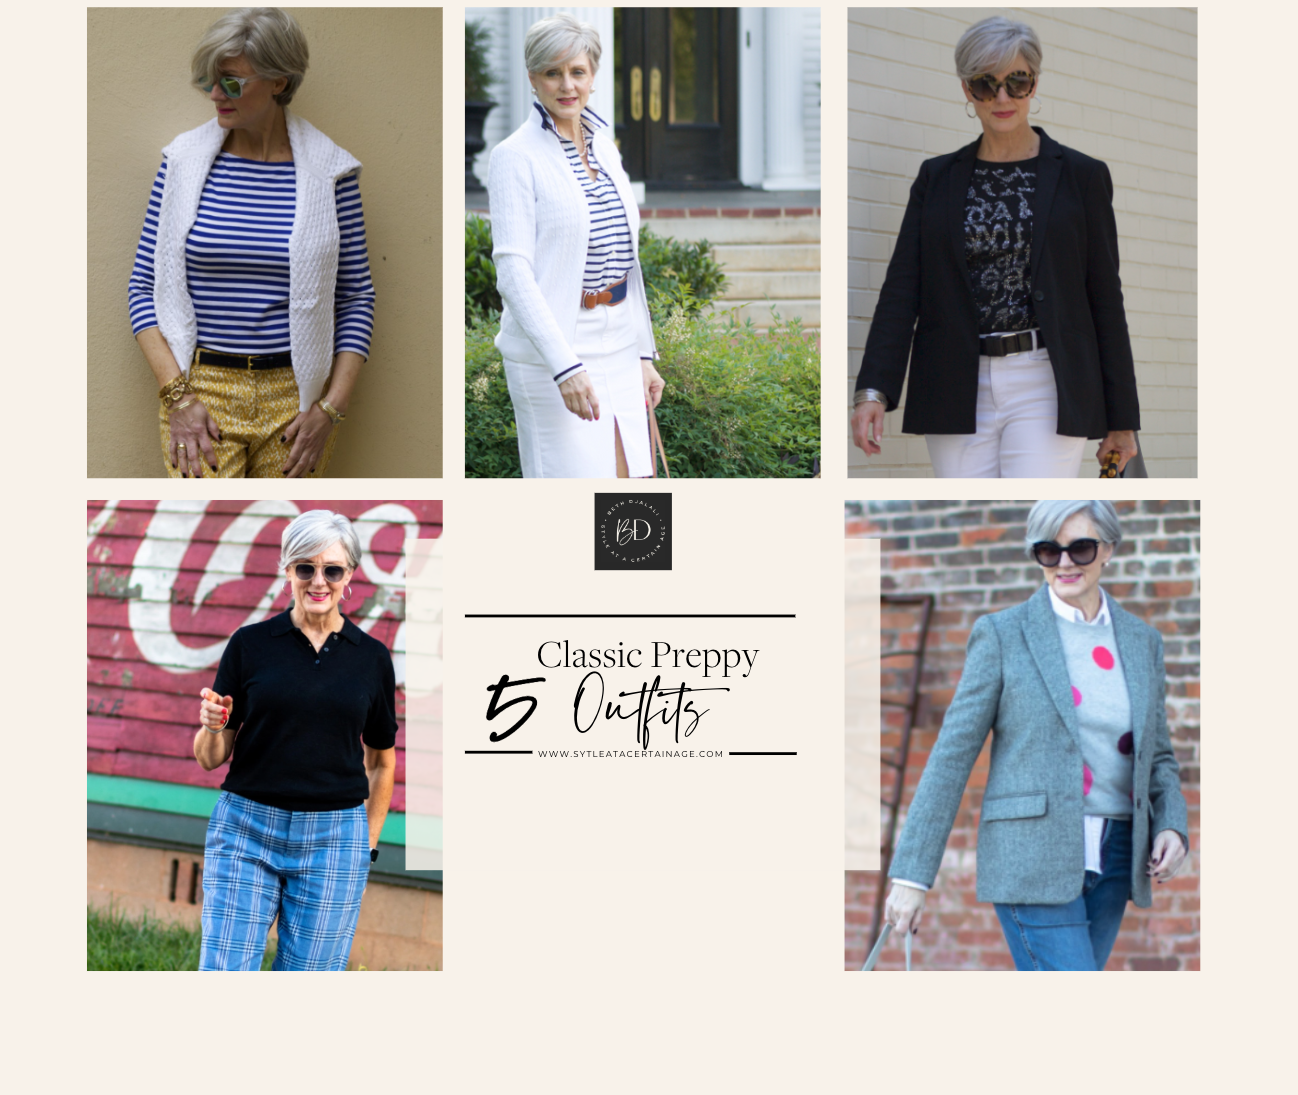 5 Classic Preppy Outfits for Women over 50